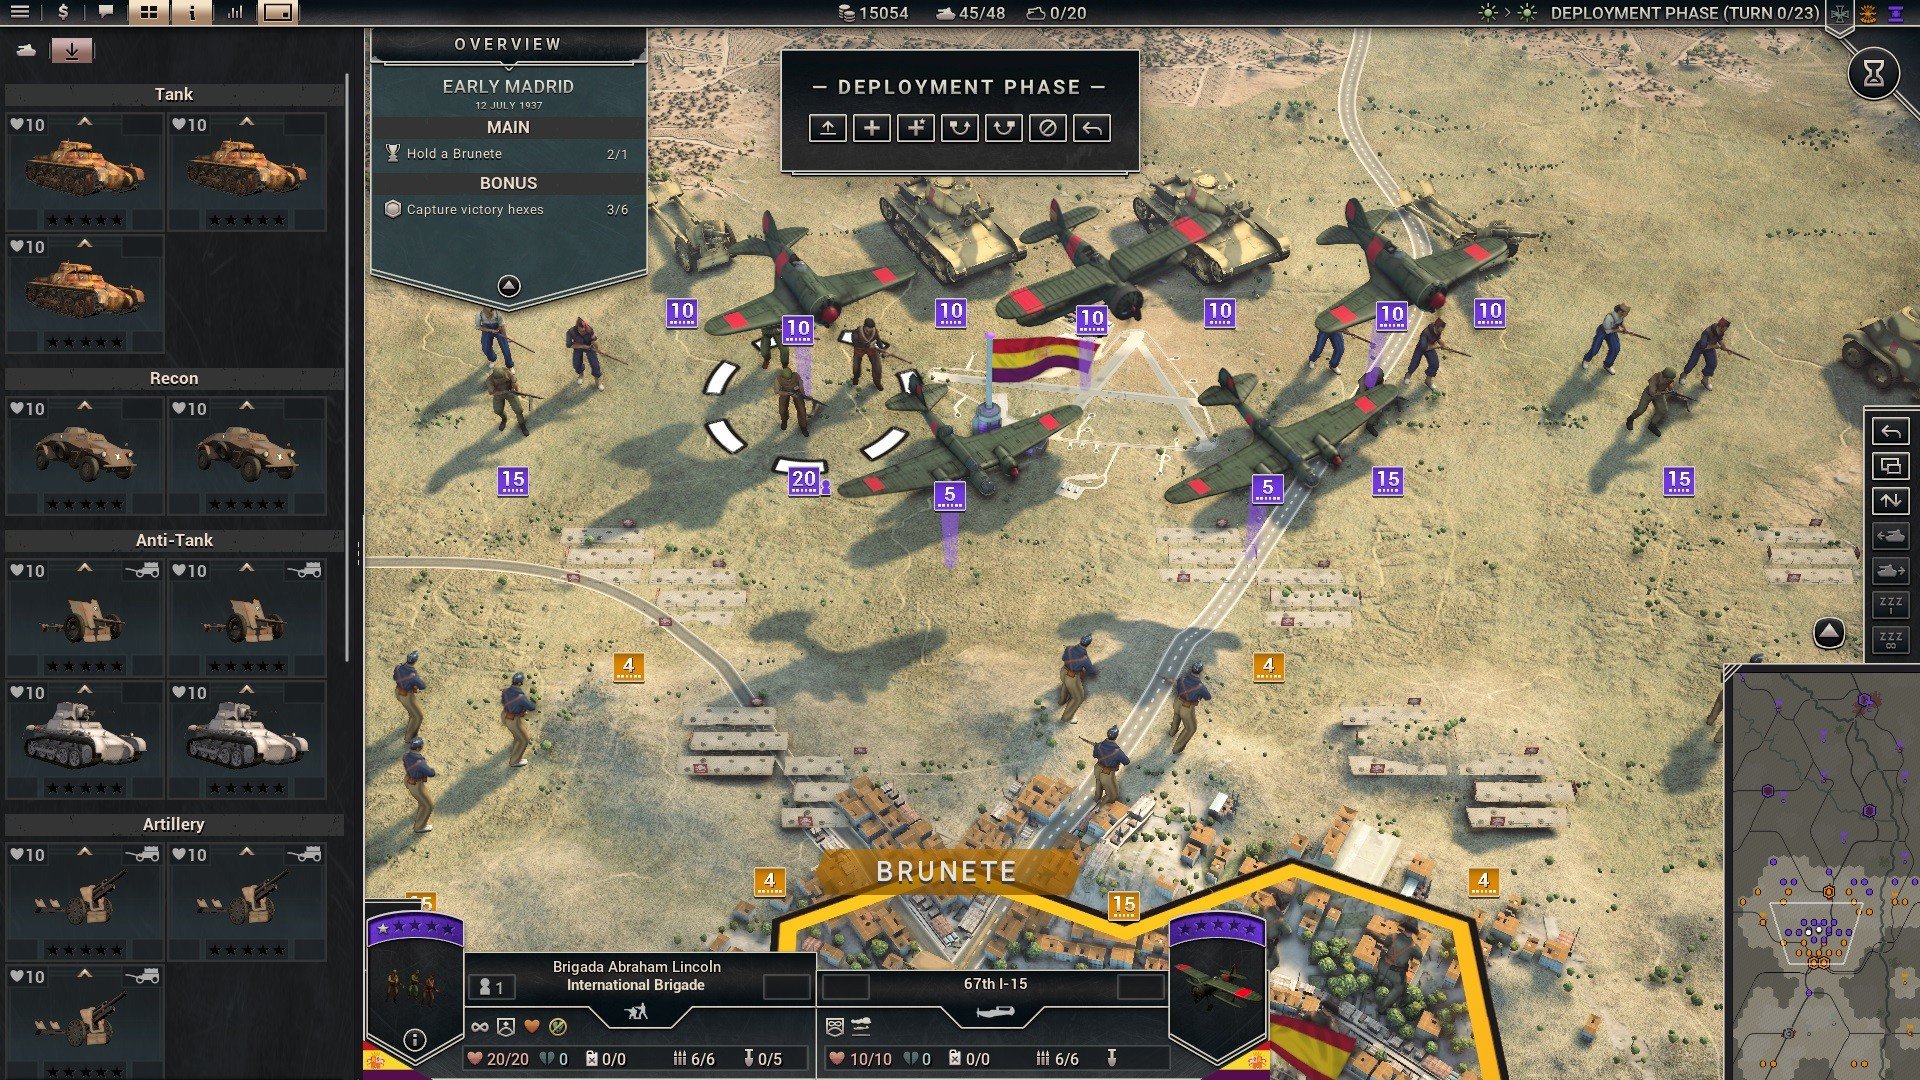 Panzer Corps 2 Axis Operations Spanish Civil War 8